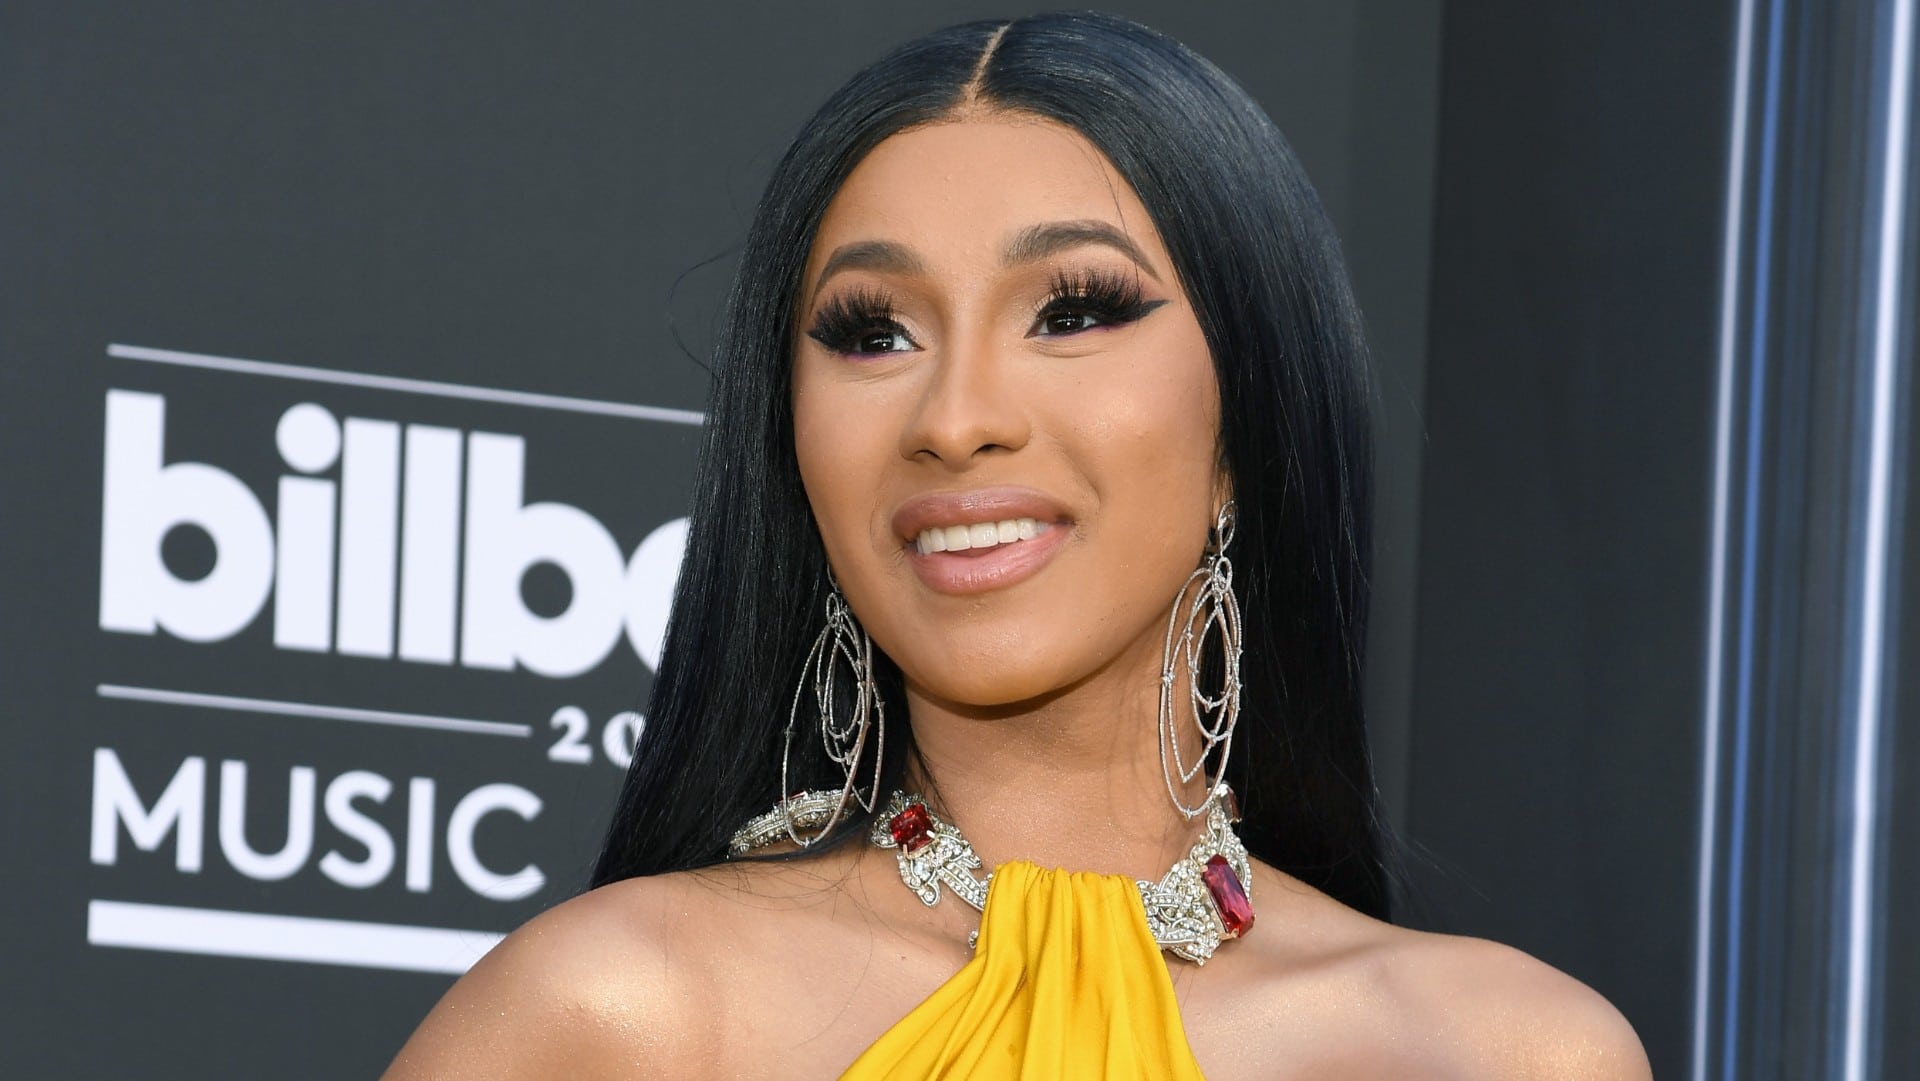 Cardi B facts: Everything you need to know about the US rapper